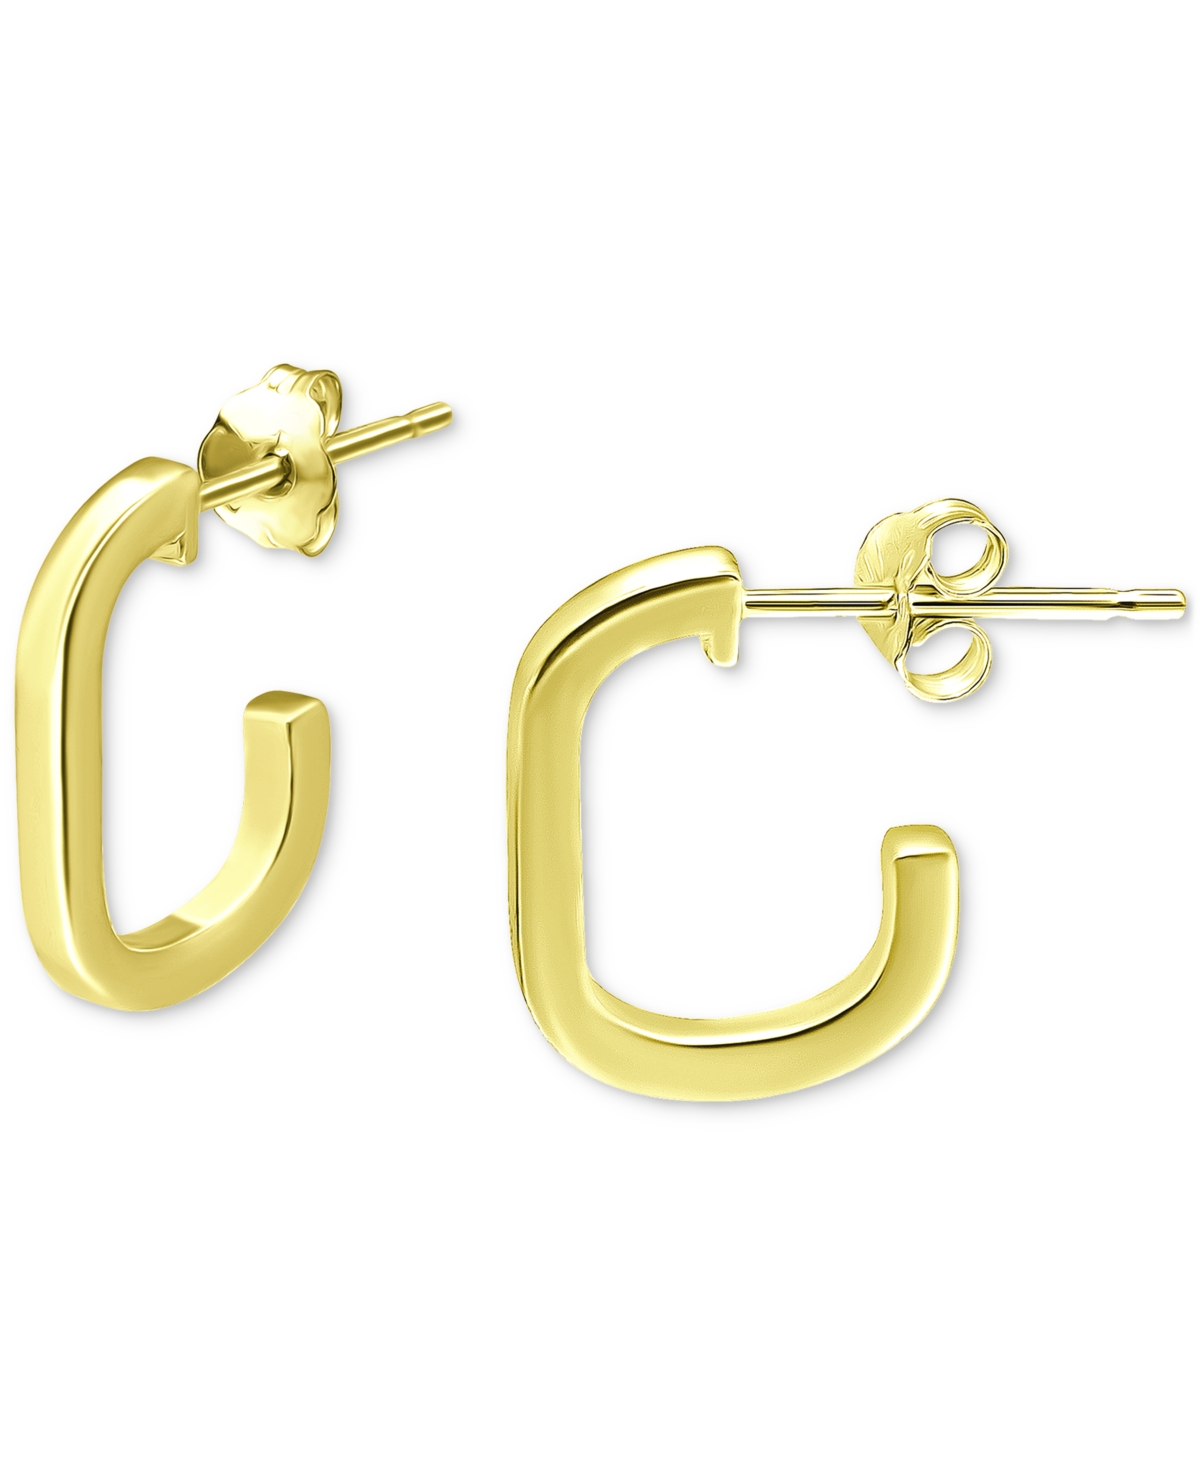 Giani Bernini Square Tube Small Hoop Earrings, Created For Macy's In Gold Over Silver